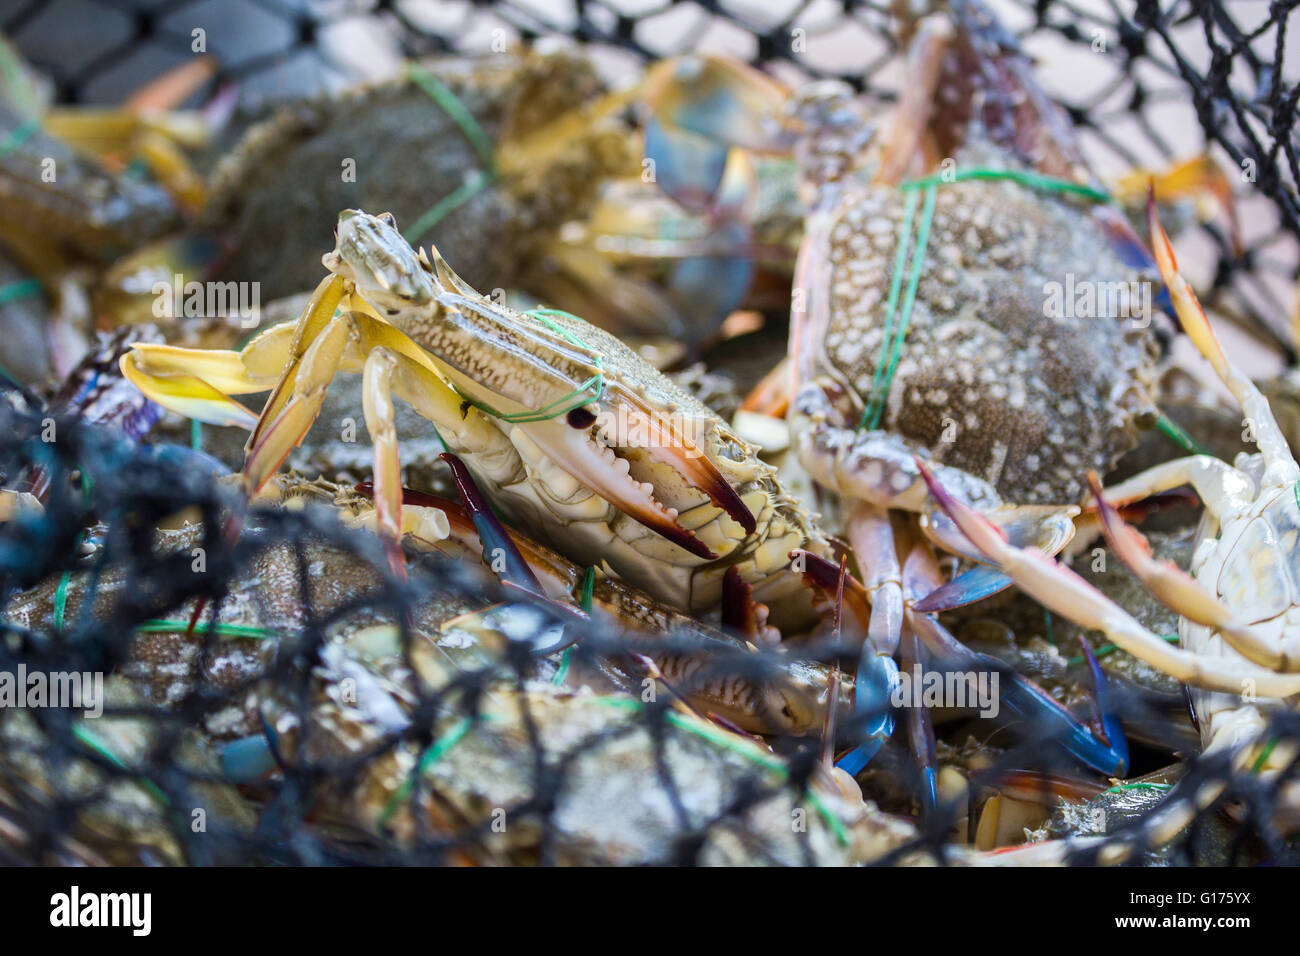 Crab is catched in the basket Stock Photo